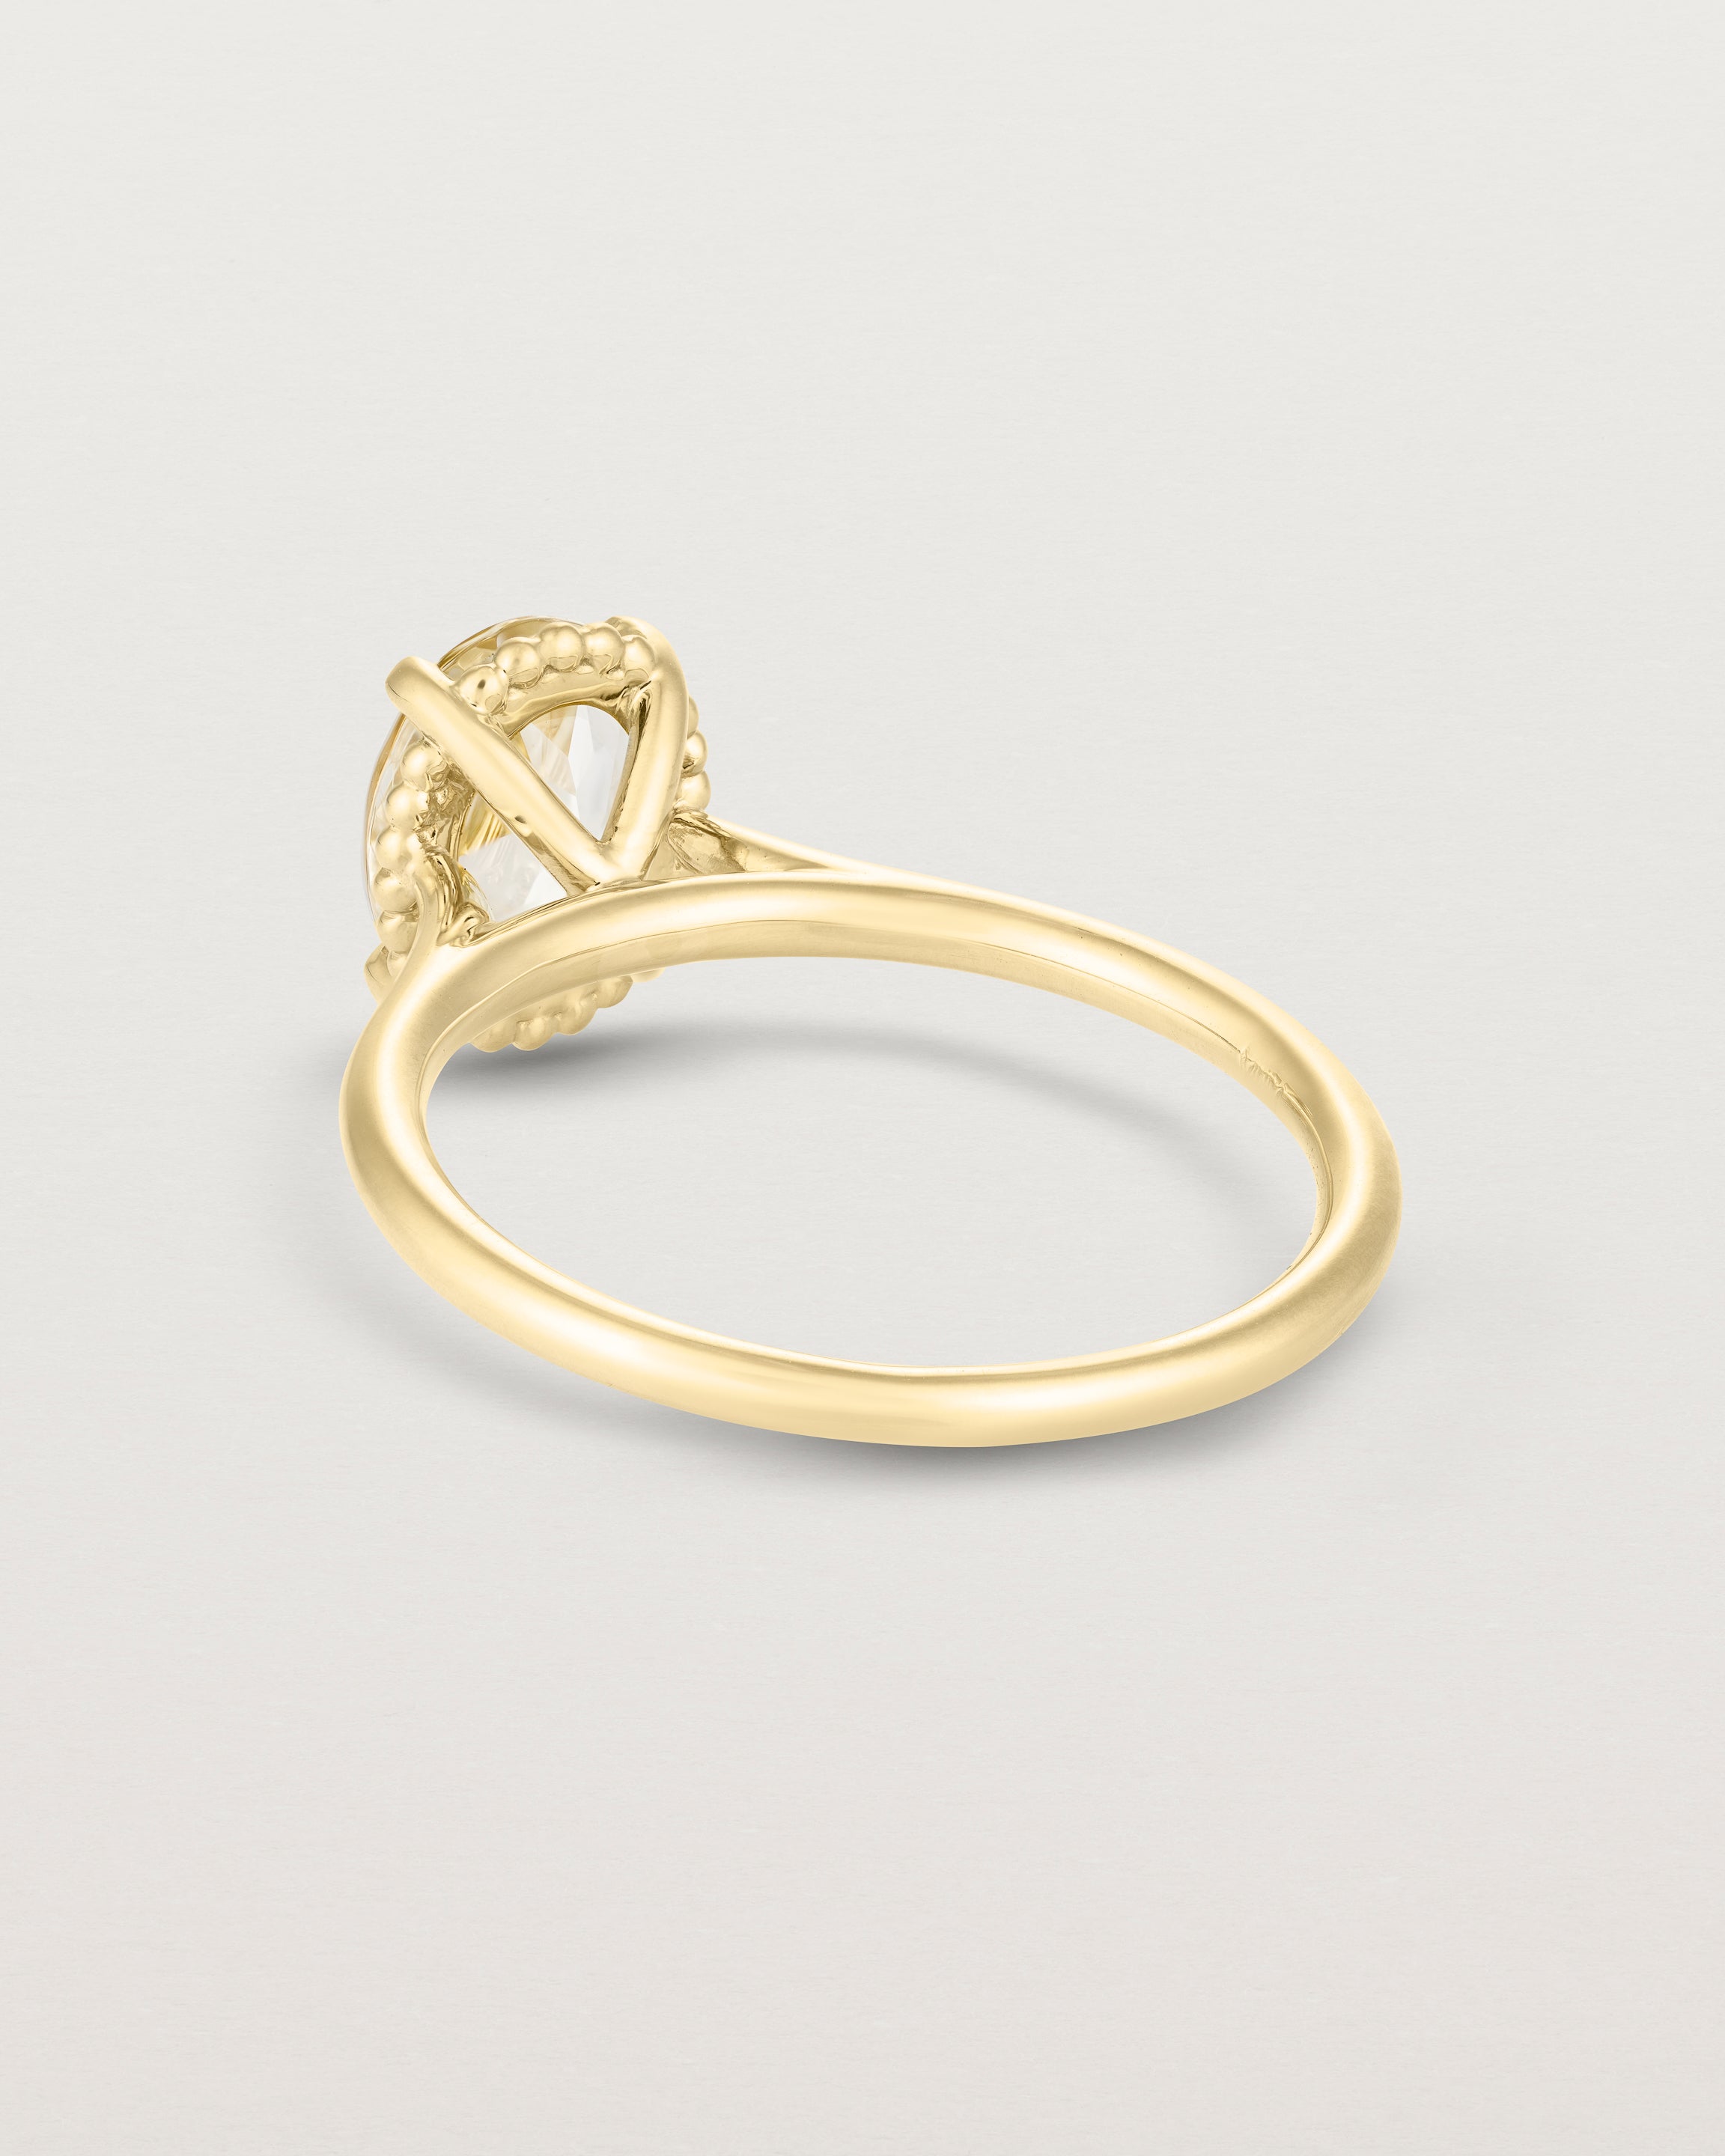 Back view of the Thea Oval Solitaire | Savannah Sunstone in yellow gold.